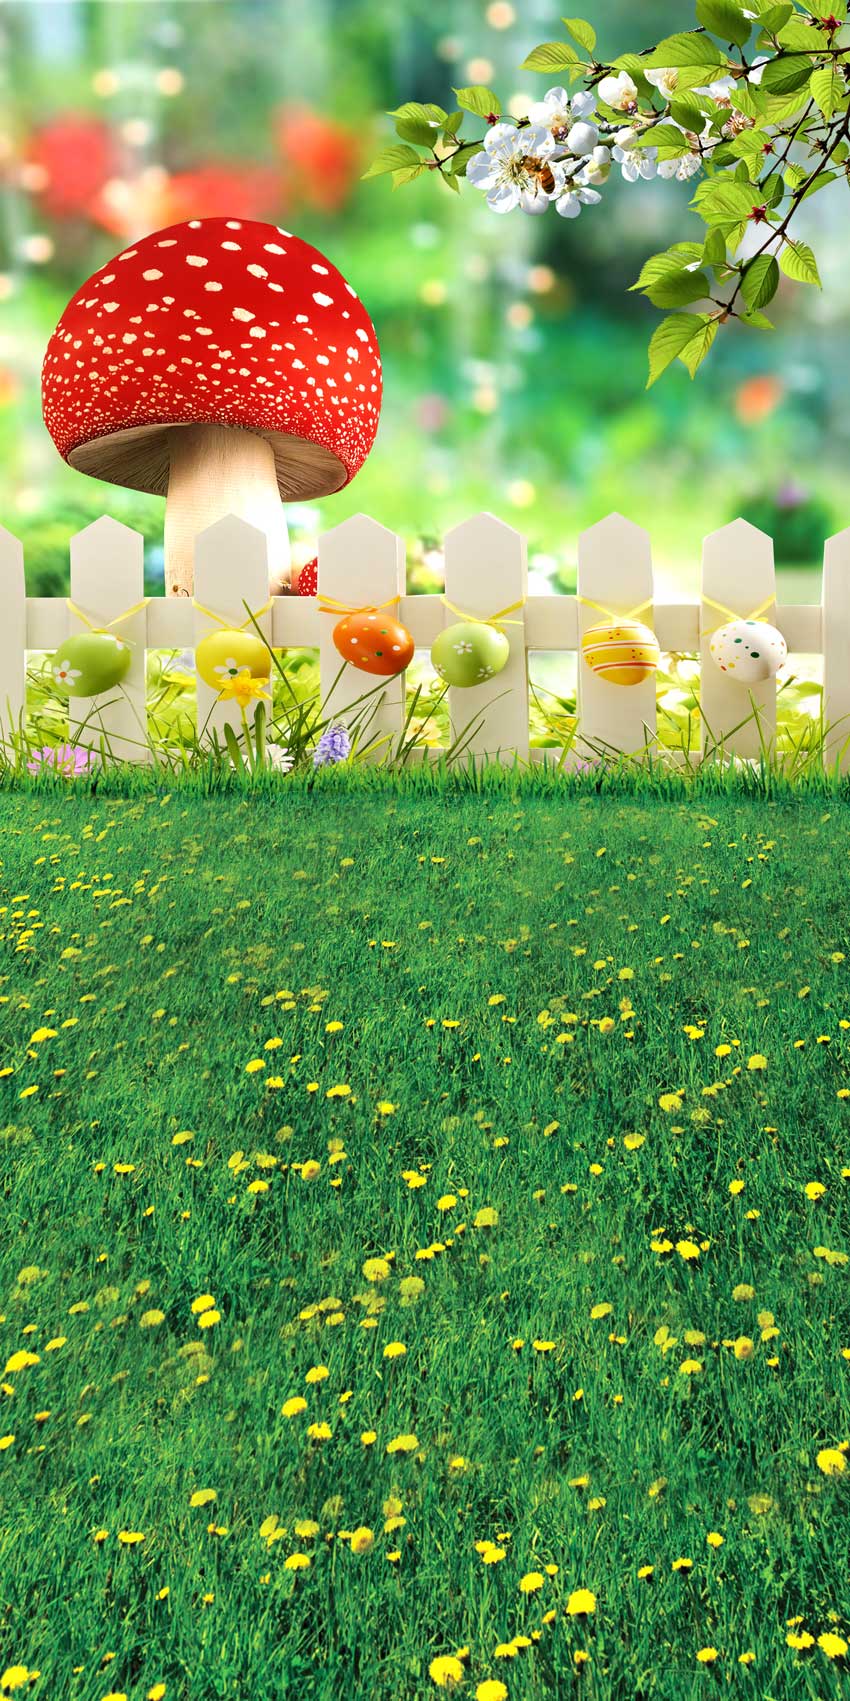 Kate Easter Backdrops Natural Scenery Spring Photography Background for Children Colorful Eggs Photo Background - Kate backdrop UK